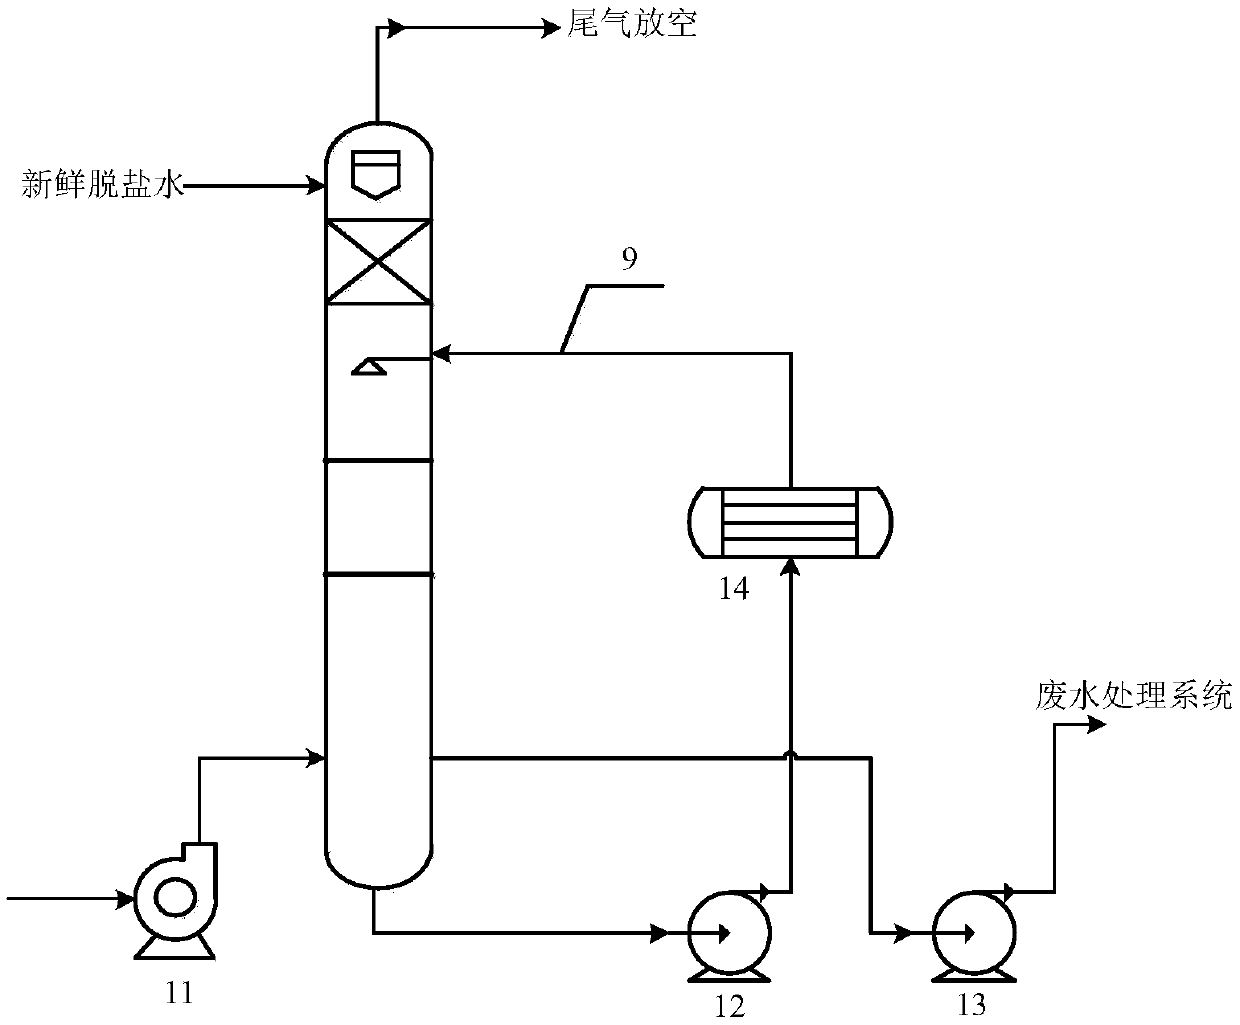 Coal pulping system waste gas purification device and coal pulping system waste gas purification process